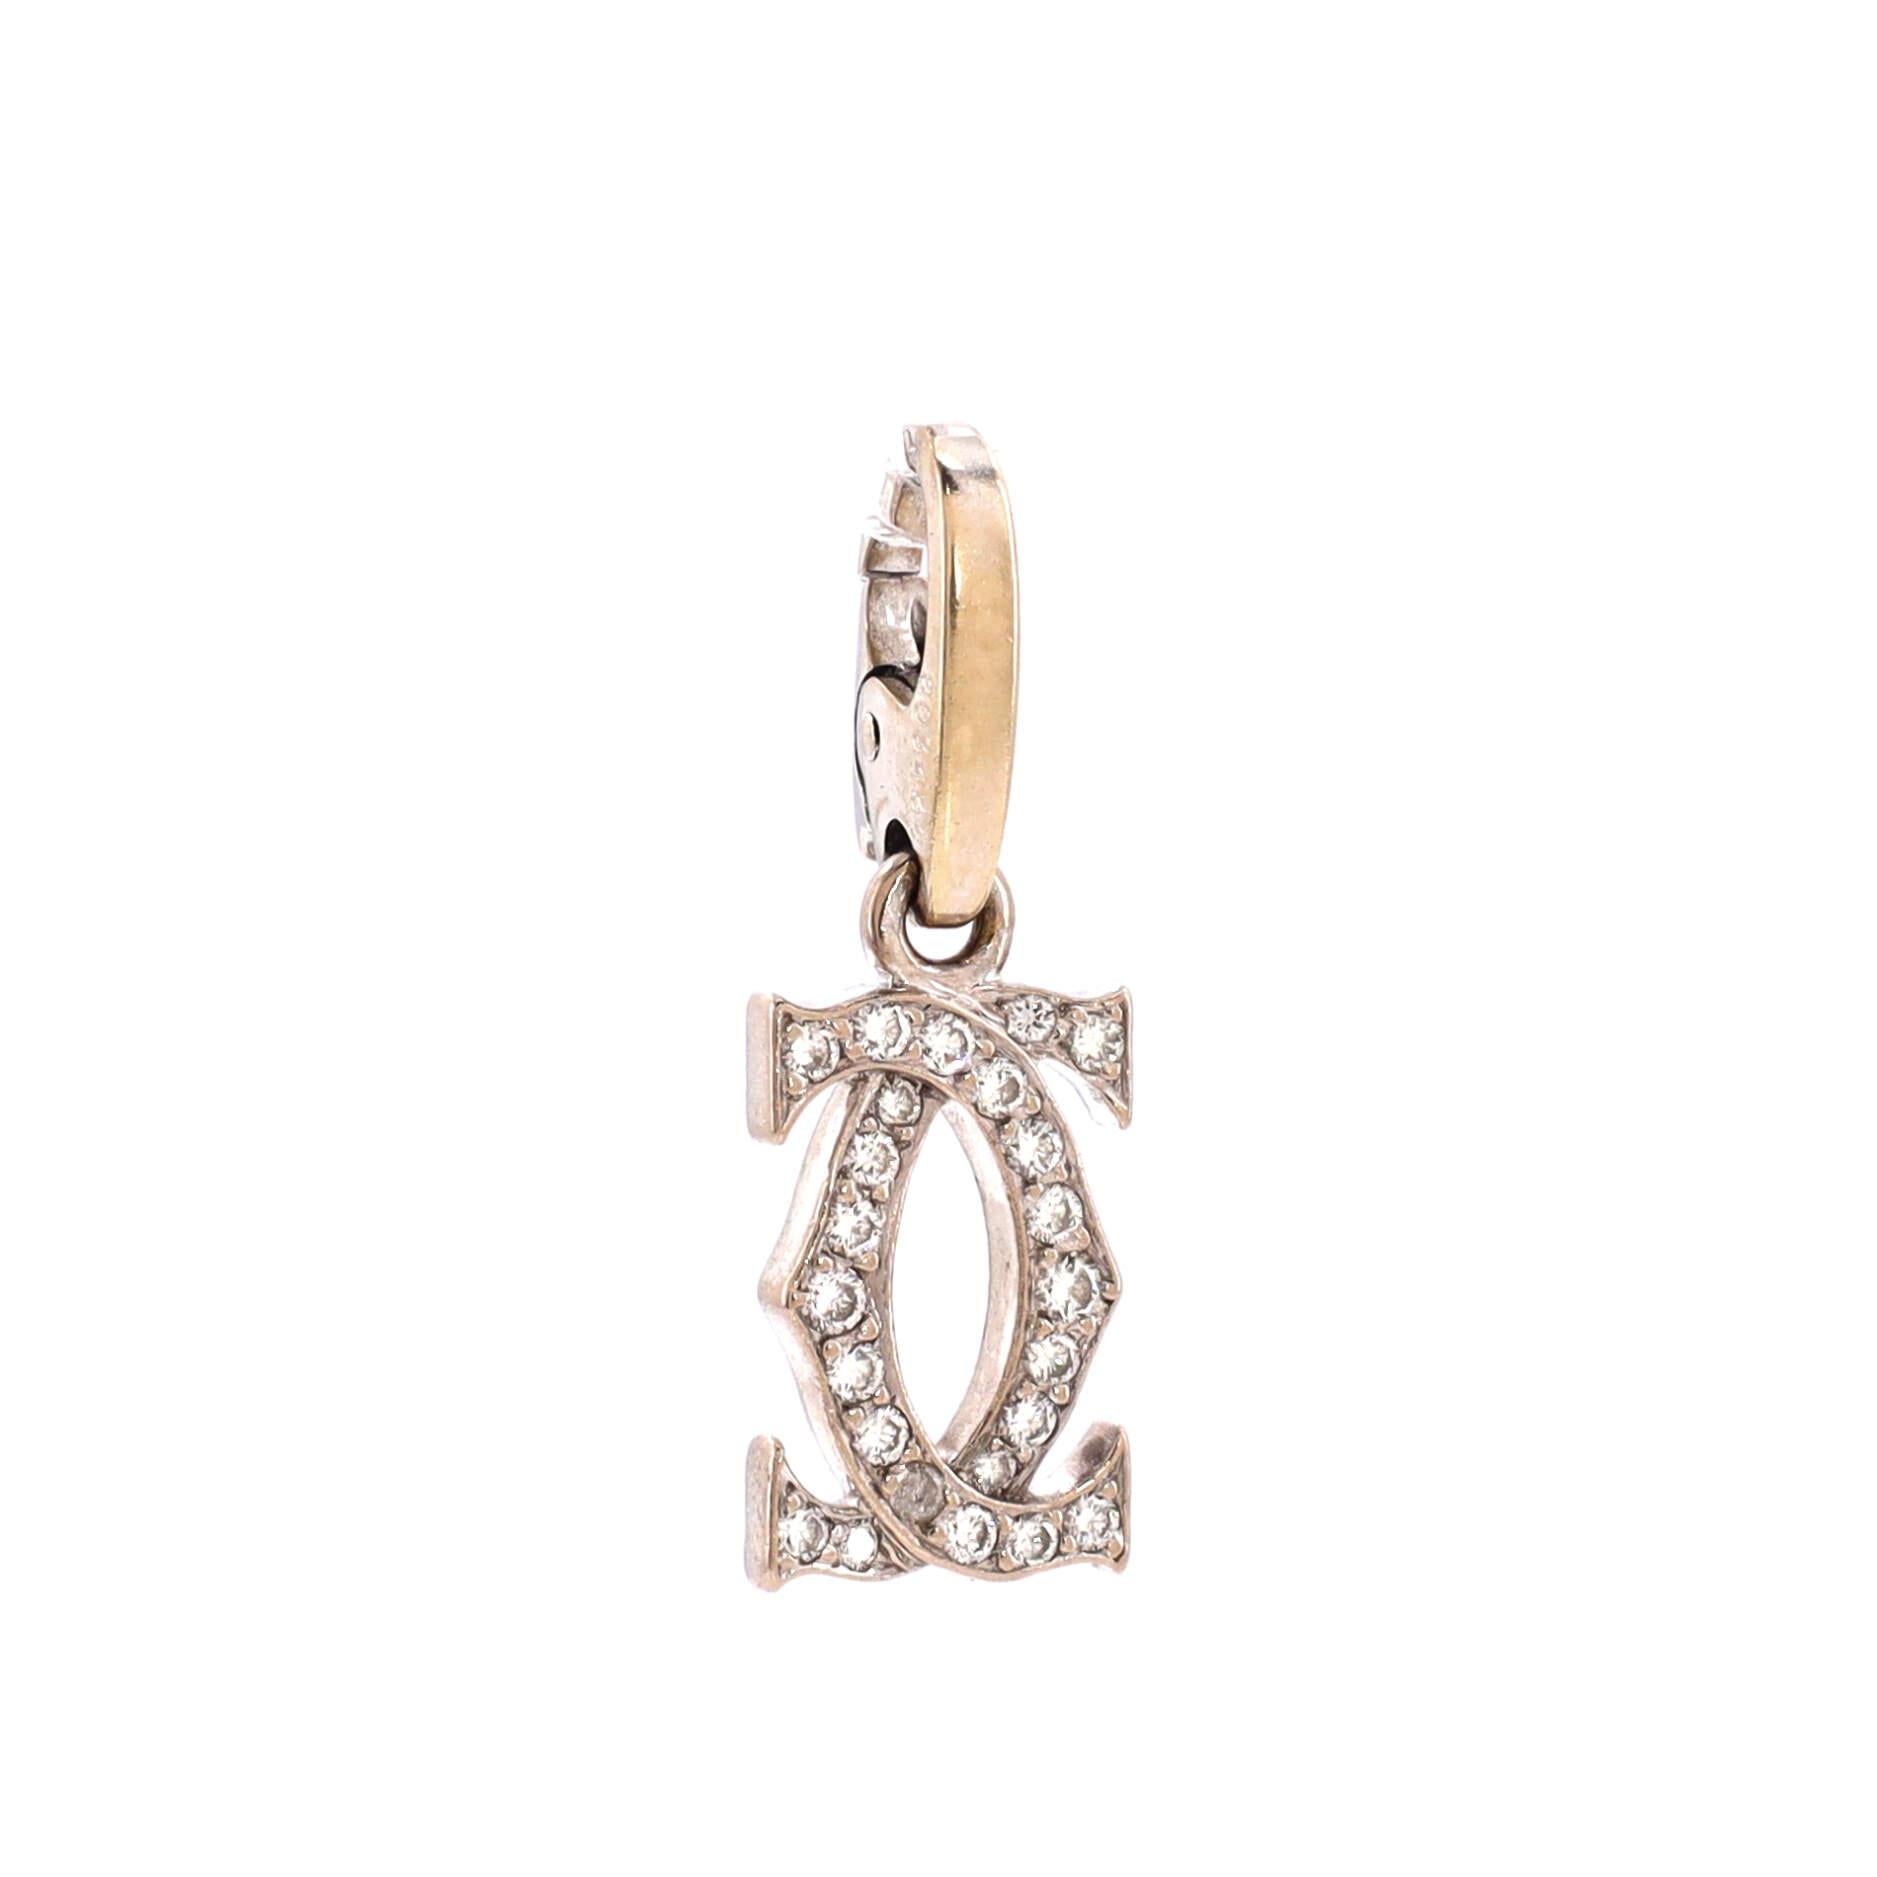 Condition: Fair. Moderately heavy wear throughout with one damaged diamond.
Accessories: No Accessories
Measurements: Height/Length: 25.50 mm, Width: 8.65 mm
Designer: Cartier
Model: Double C Charm Pendant Pendant & Charms 18K White Gold with